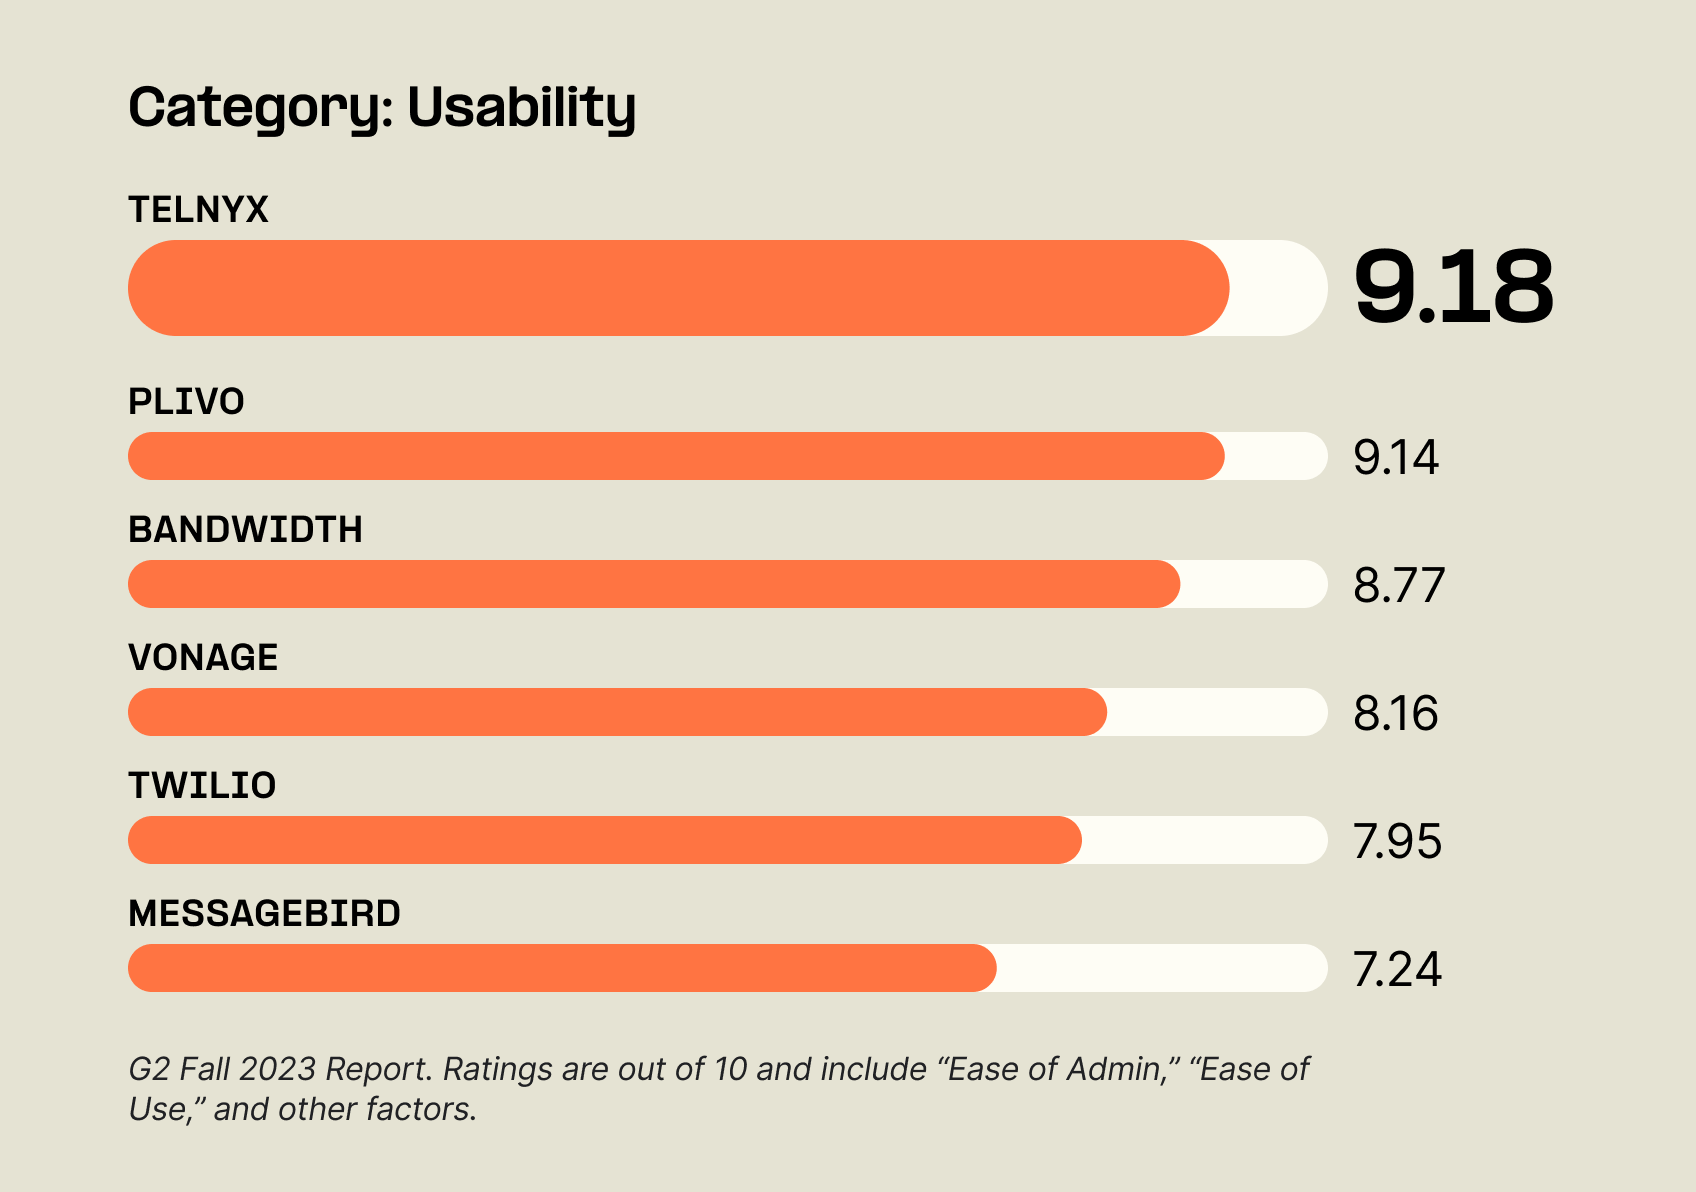 Telnyx leads in "Best Usability" at 94%.